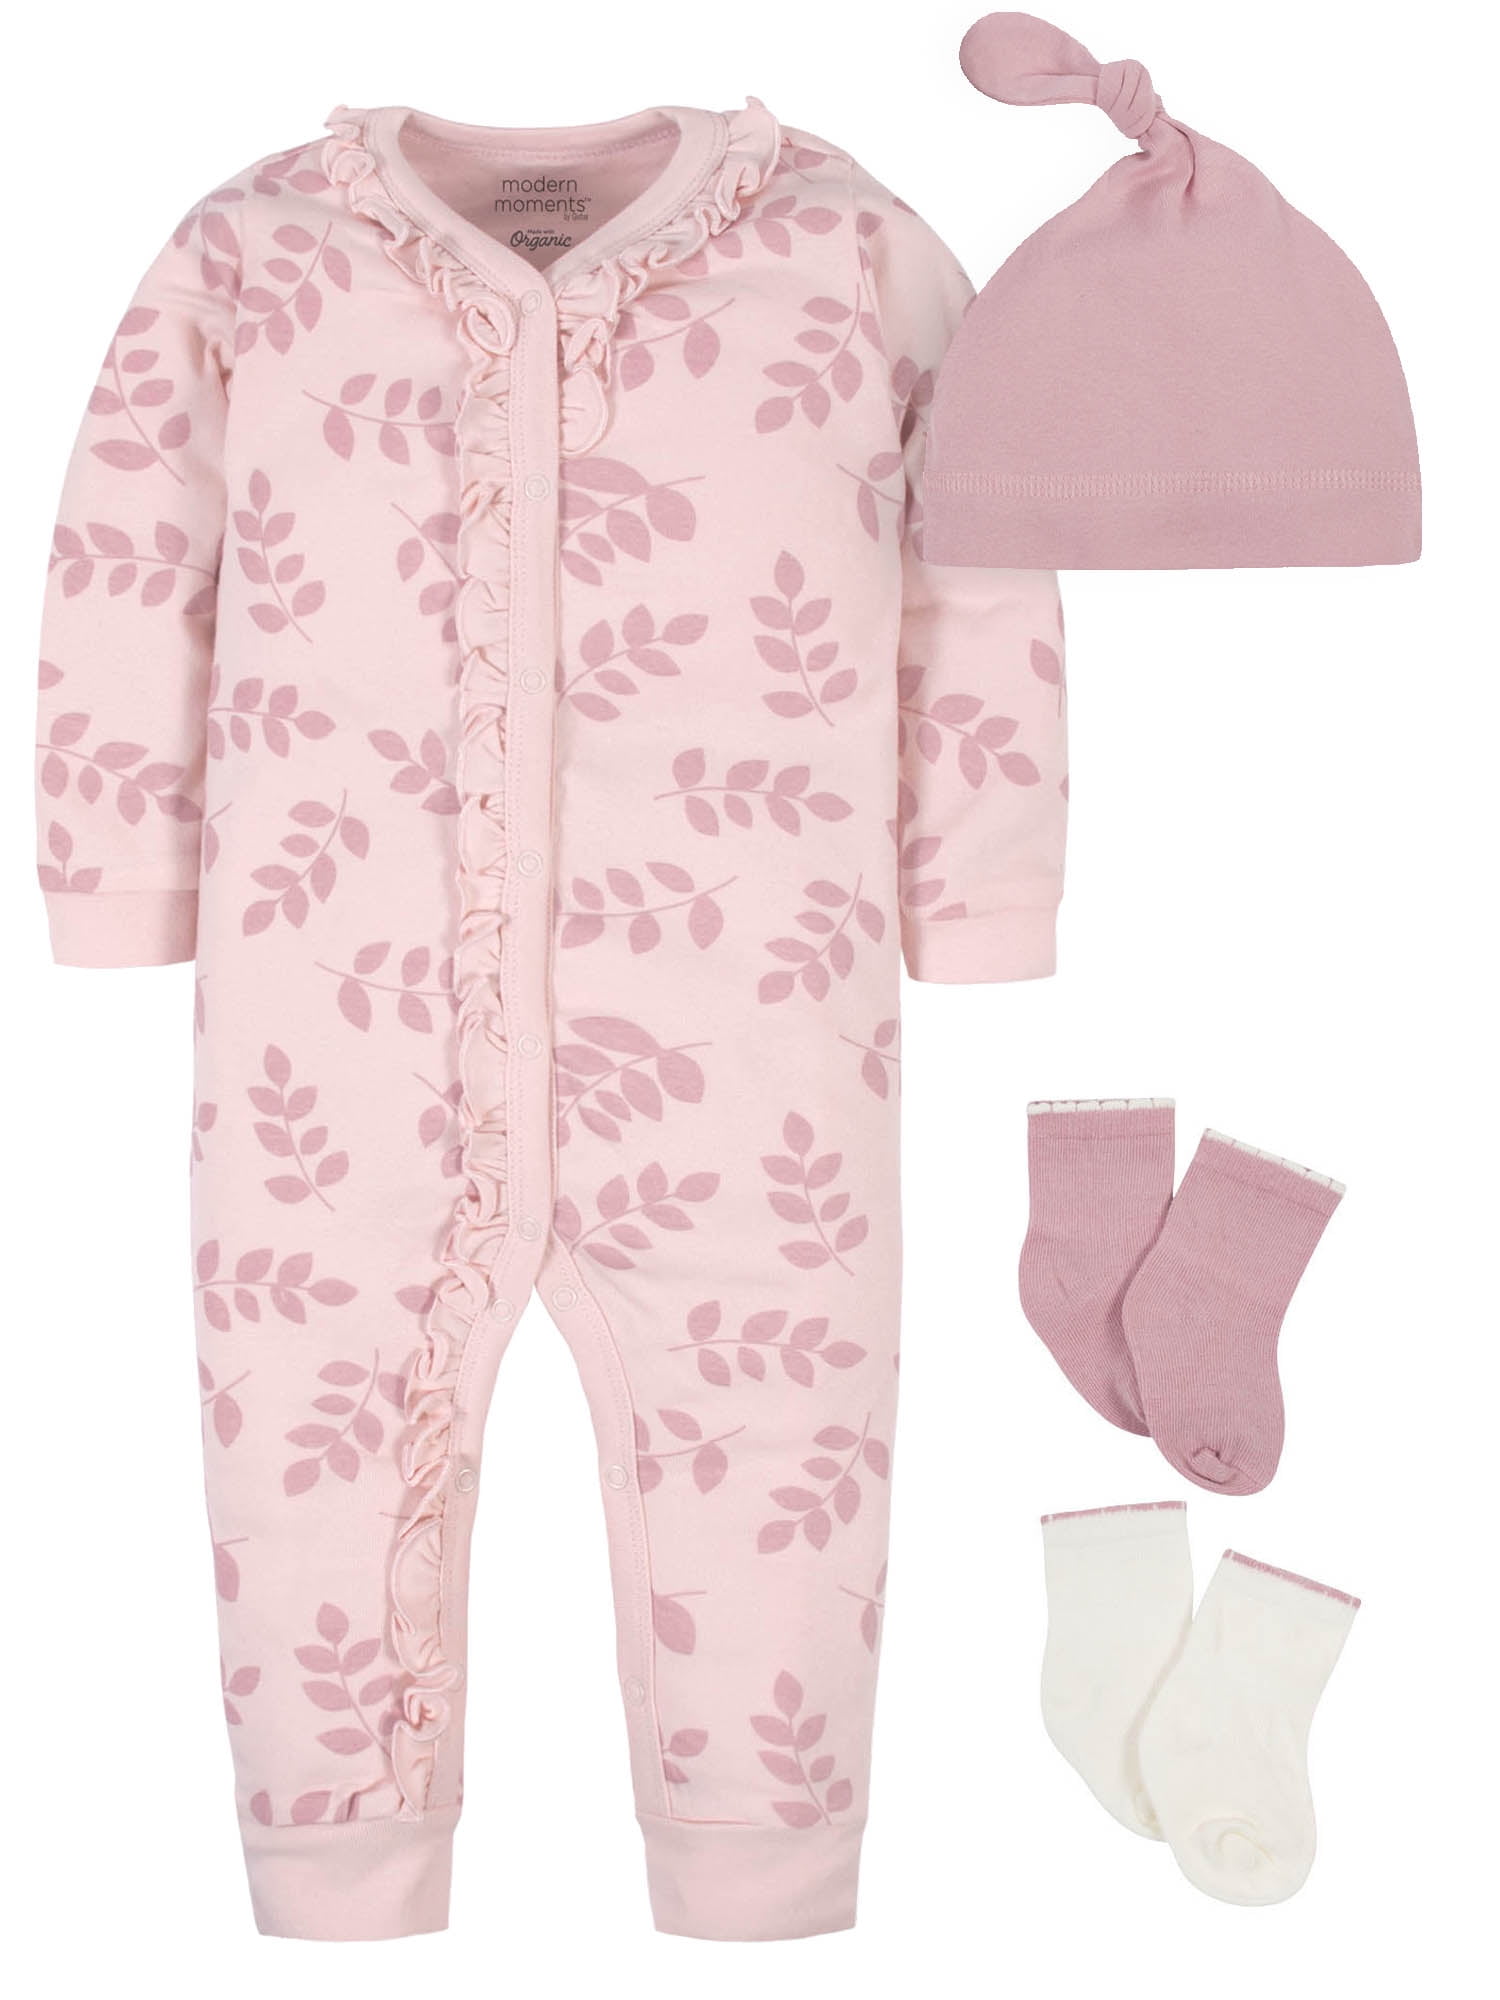 Modern Moments - Modern Moments by Gerber Baby Girl Coverall, Cap and ...